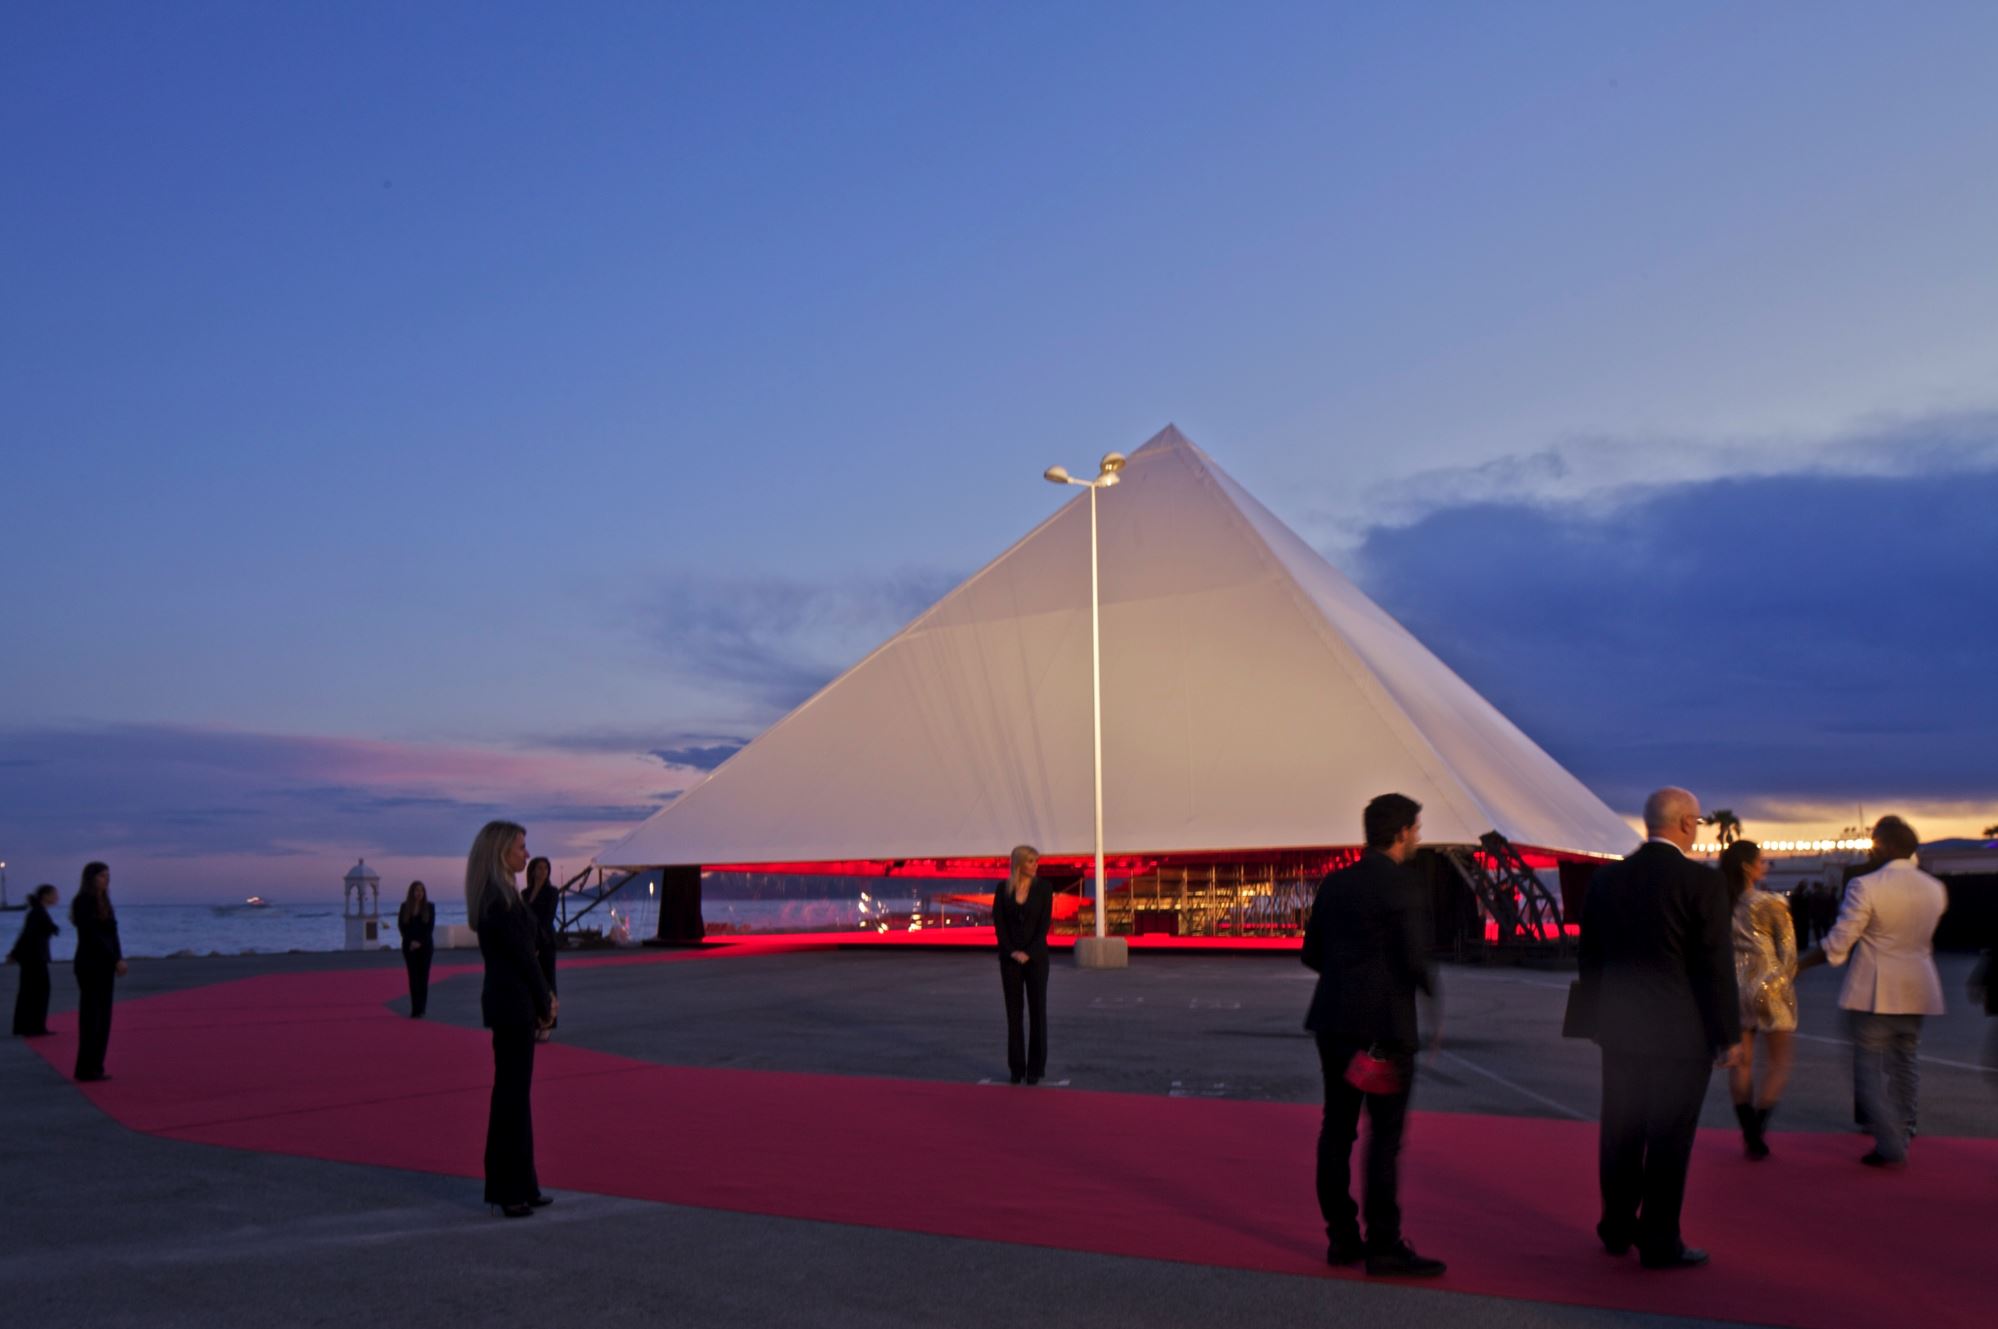 In 2012 West commissioned global architects OMA to design a temporary pavilion for the Cannes Film Festival. Image courtesy of OMA